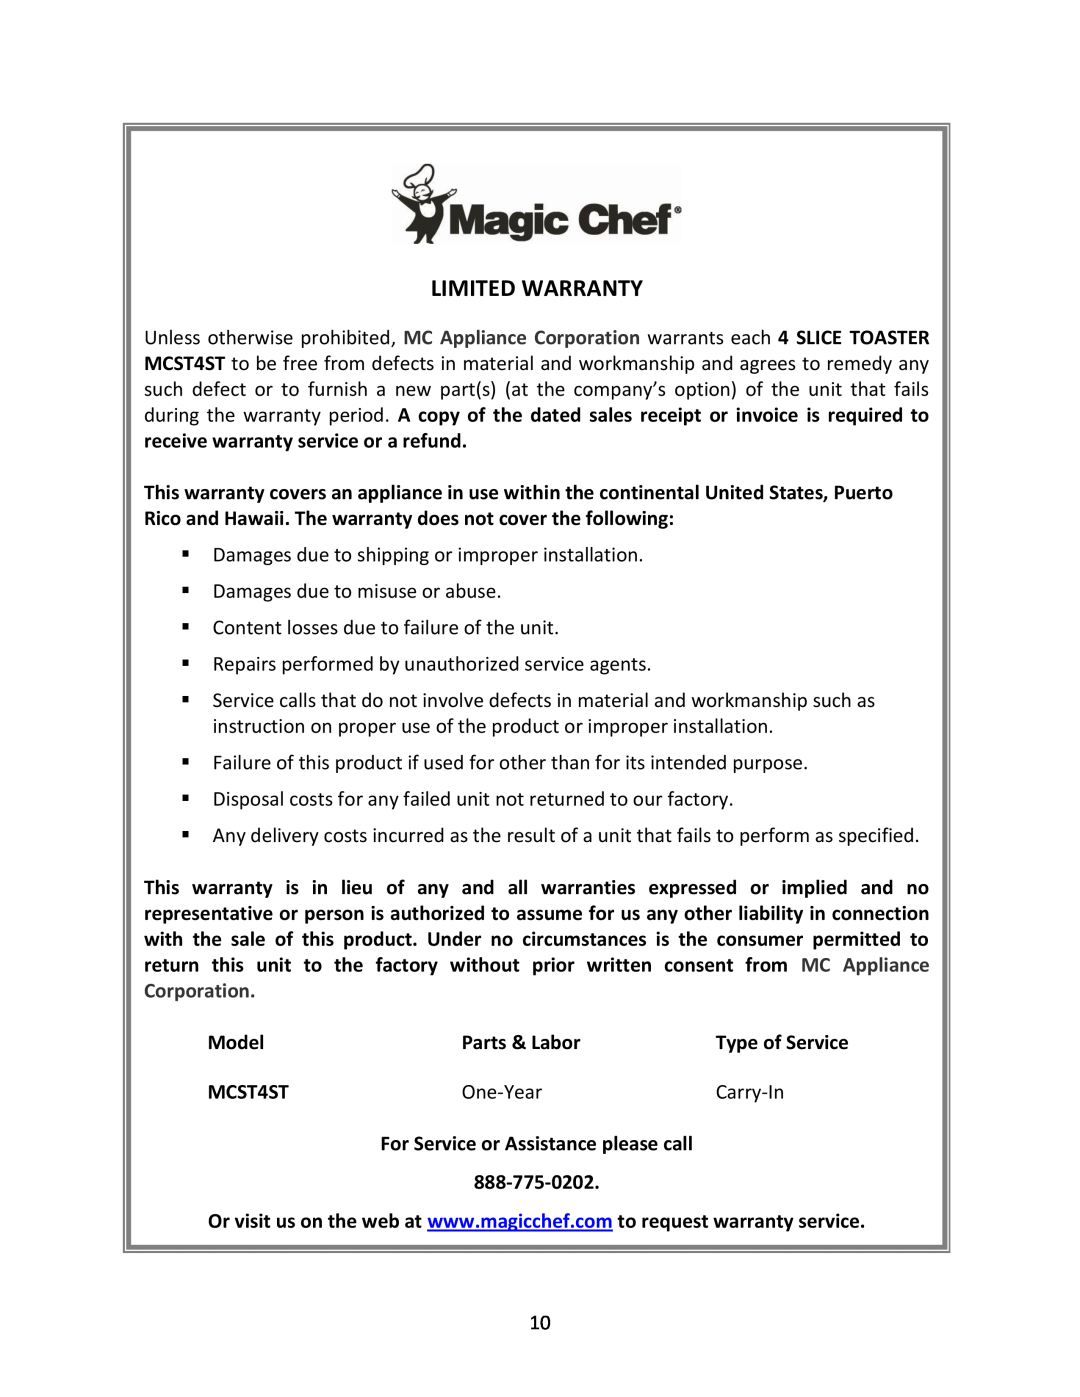 Magic Chef MCST4ST instruction manual Model, Parts & Labor, One-Year, Carry-In, Limited Warranty 